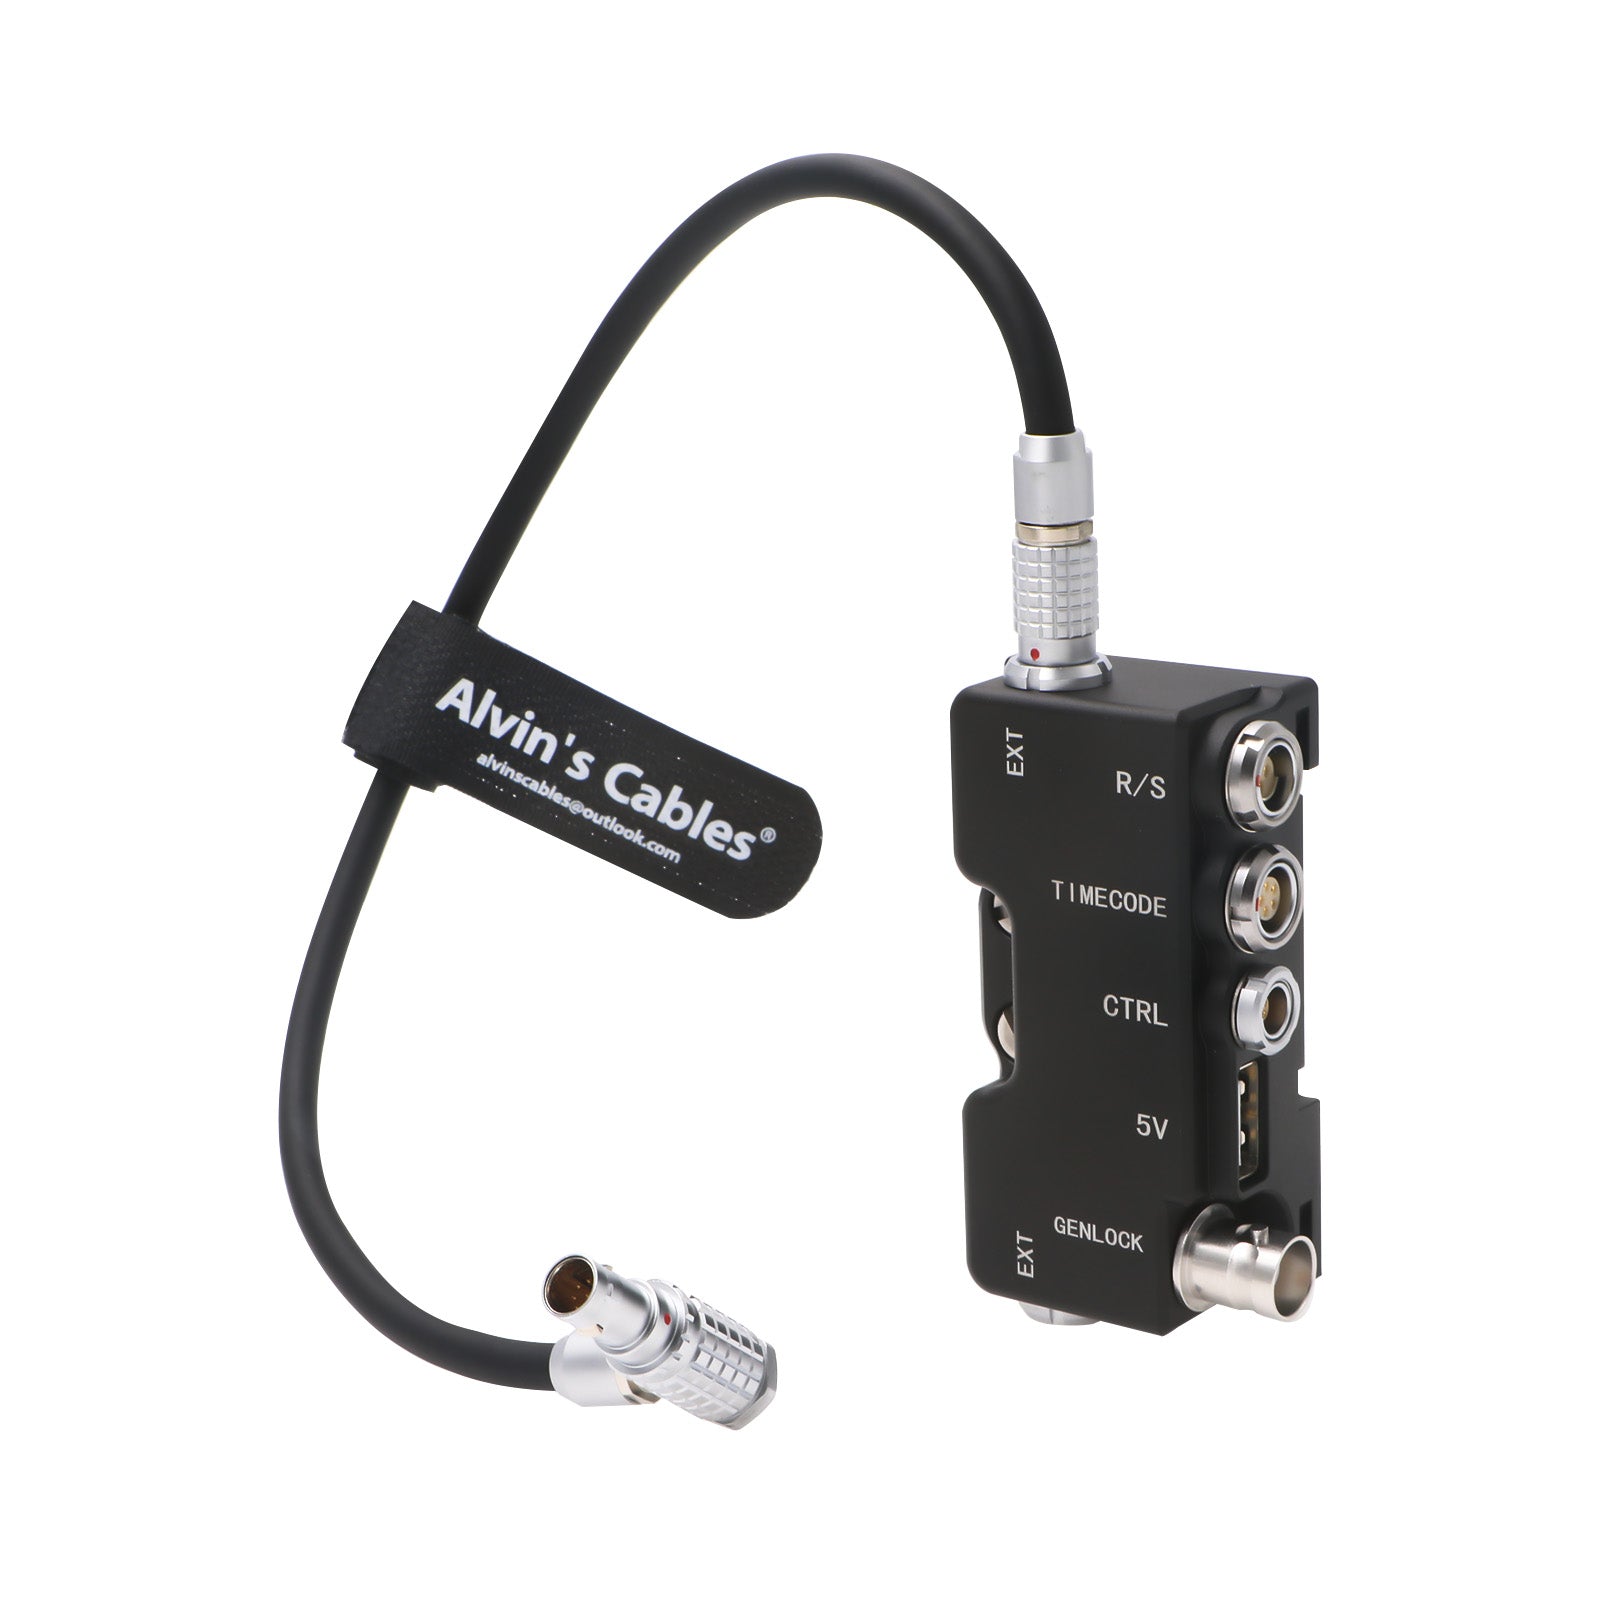 Alvin’s Cables Breakout B-Box for RED-KOMODO Camera EXT-9-Pin to Run-Stop|Timecode|CTRL|5V USB| Genlock-BNC Splitter-Box with Straight to Right Angle Cable